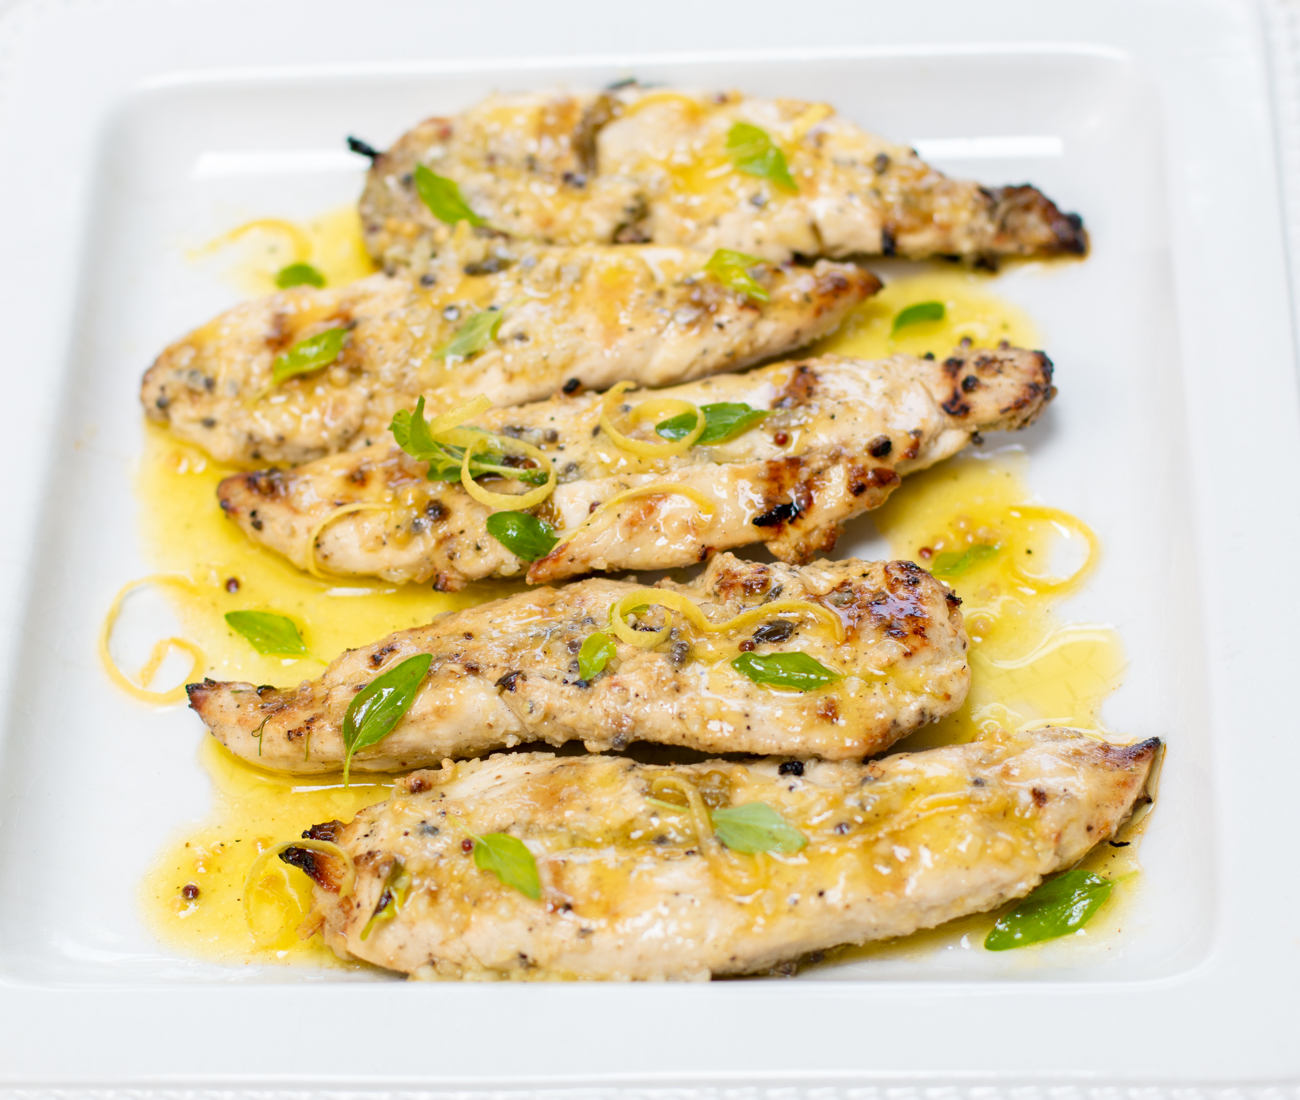 Fennel Salad and Perfect Grilled Chicken with Karen's Lemon-Oregano Marinade 